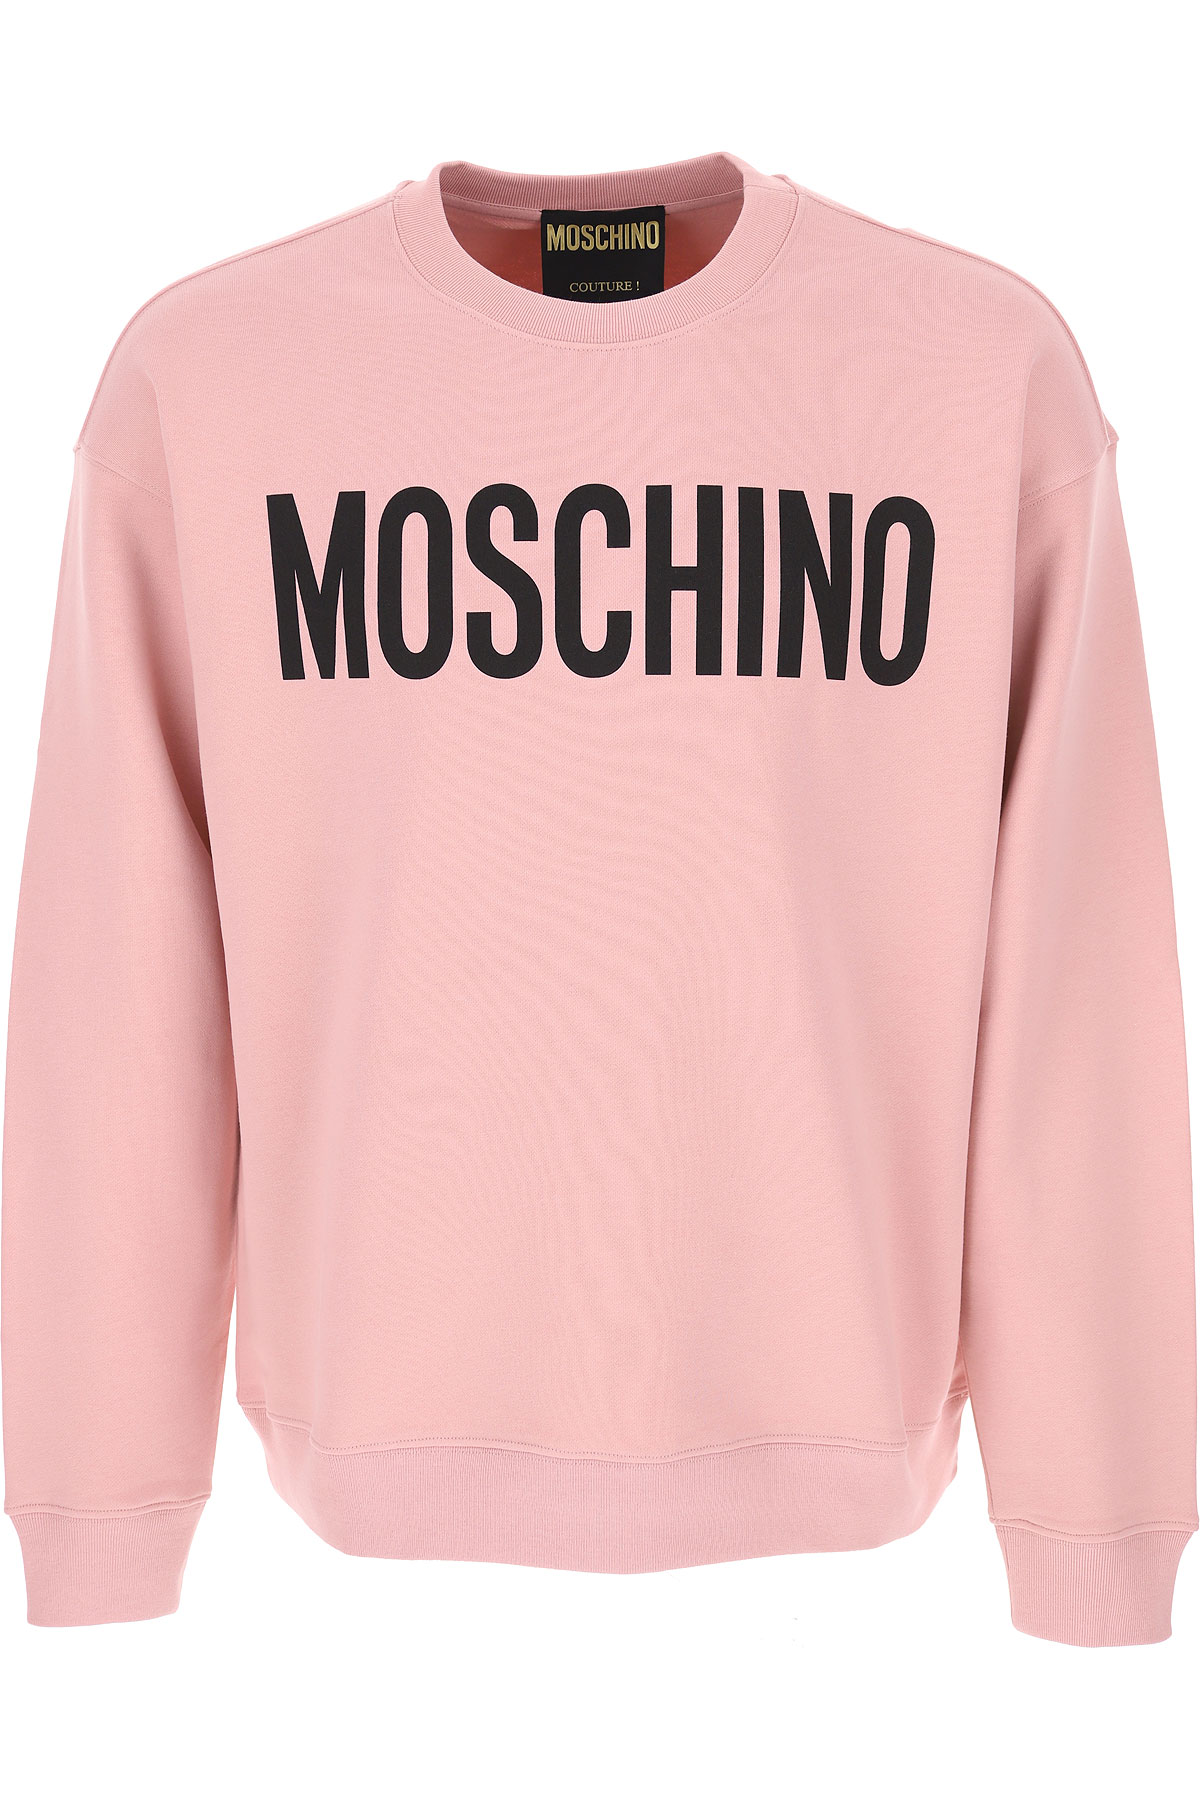 Mens Clothing Moschino, Style code: a1701-7028-1187